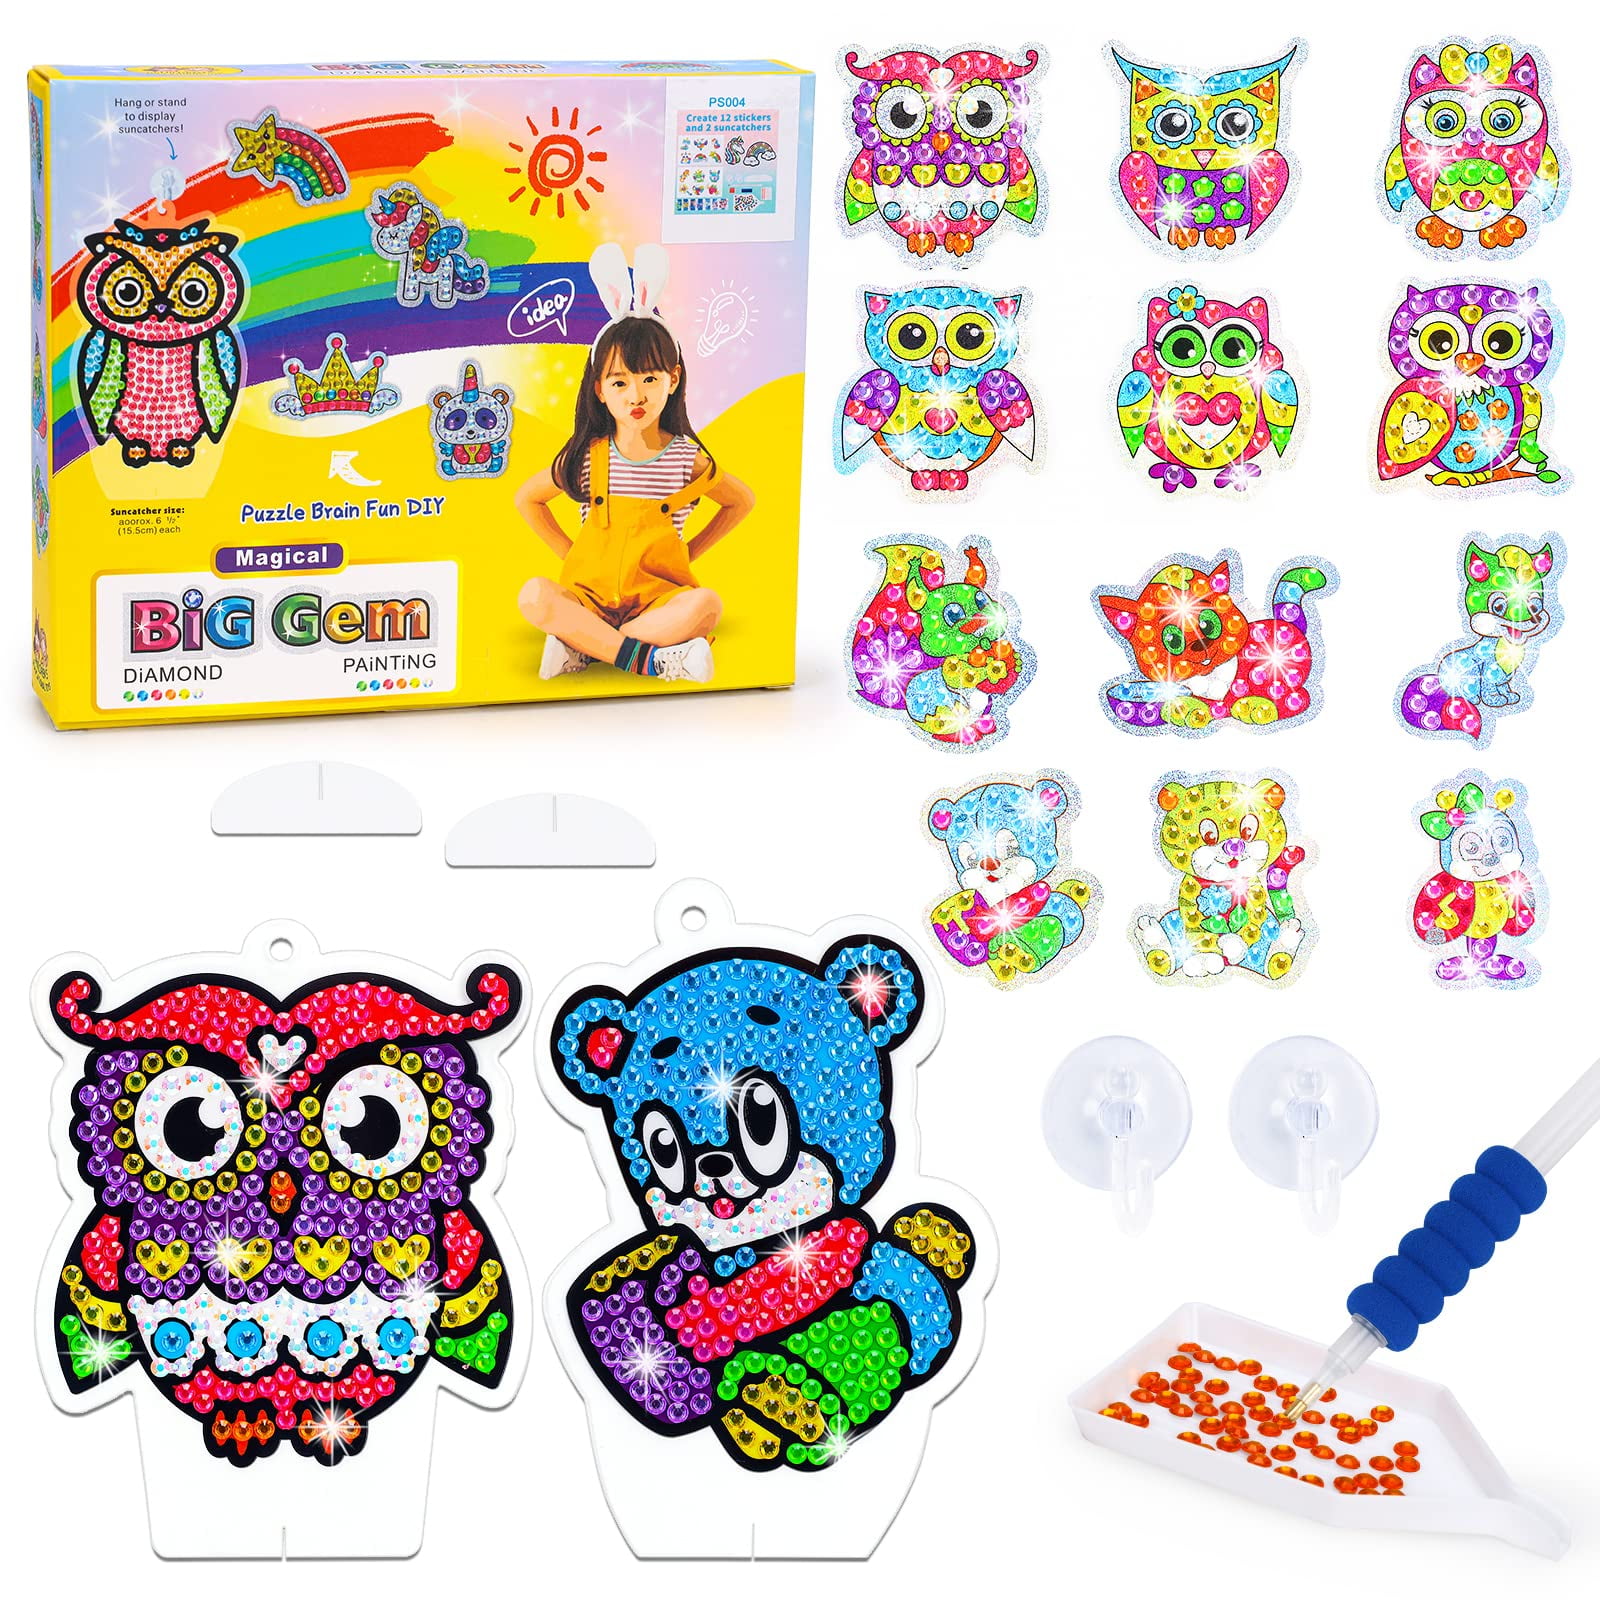  Learn & Climb Arts & Crafts Gem Art Kit for Girls Ages 8-12.  Diamond Painting Gift for Girls : Toys & Games